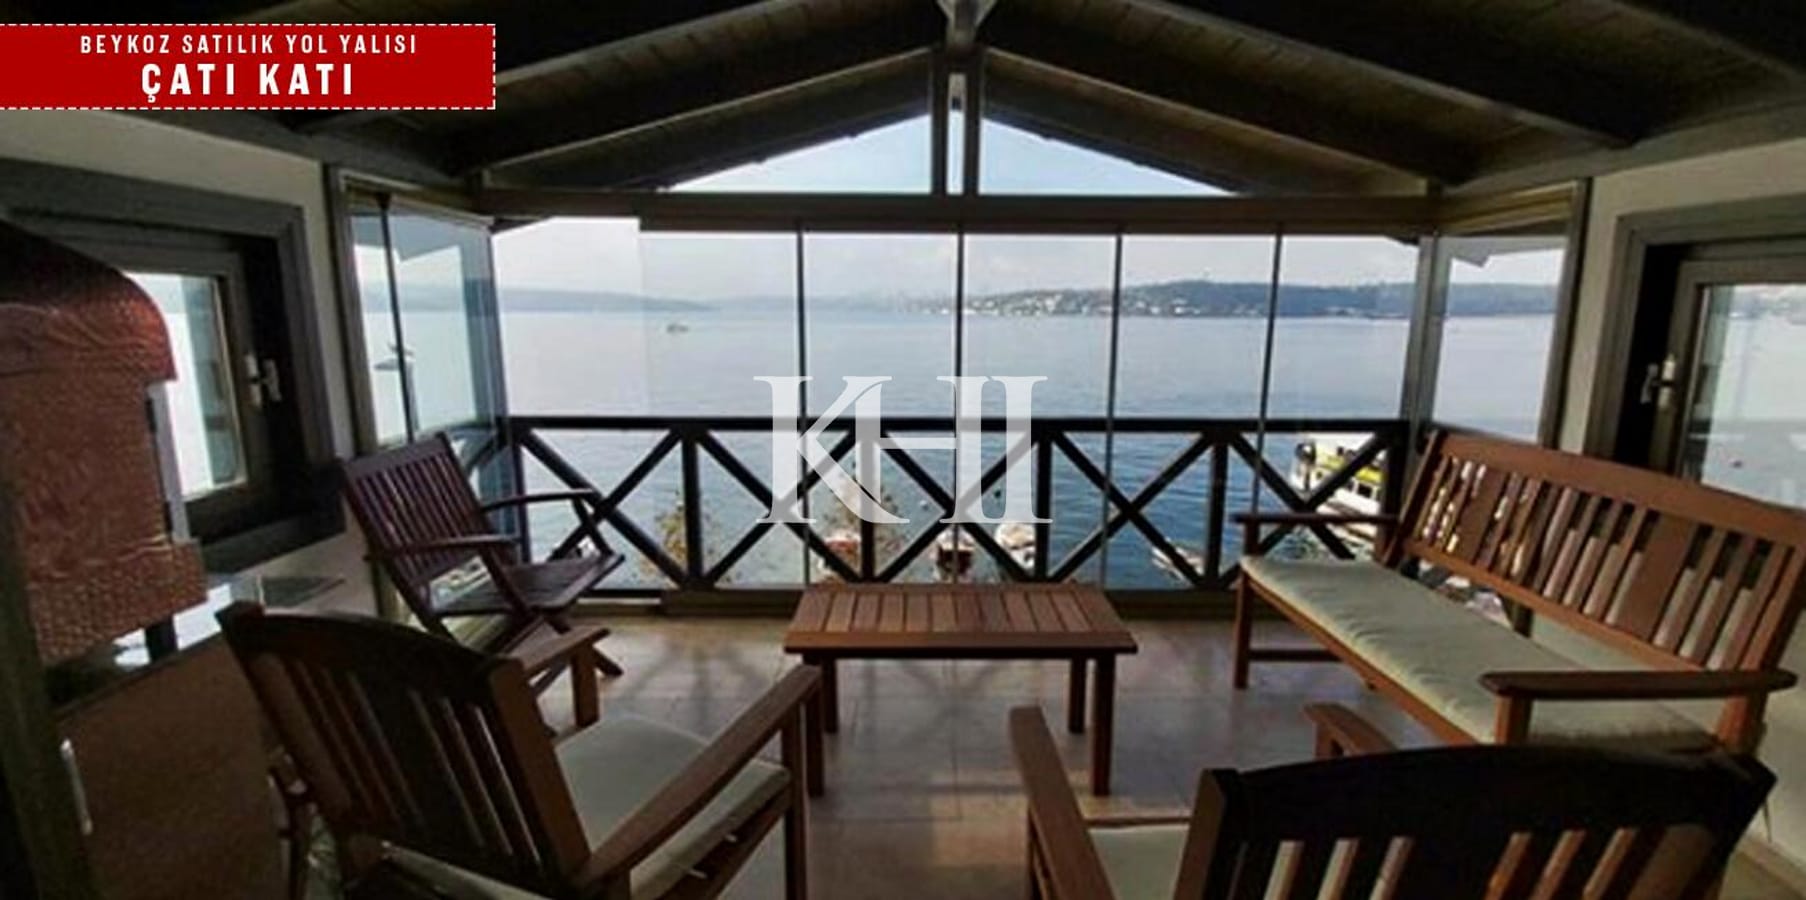 Historic Seafront Villa In Istanbul For Sale Slide Image 20